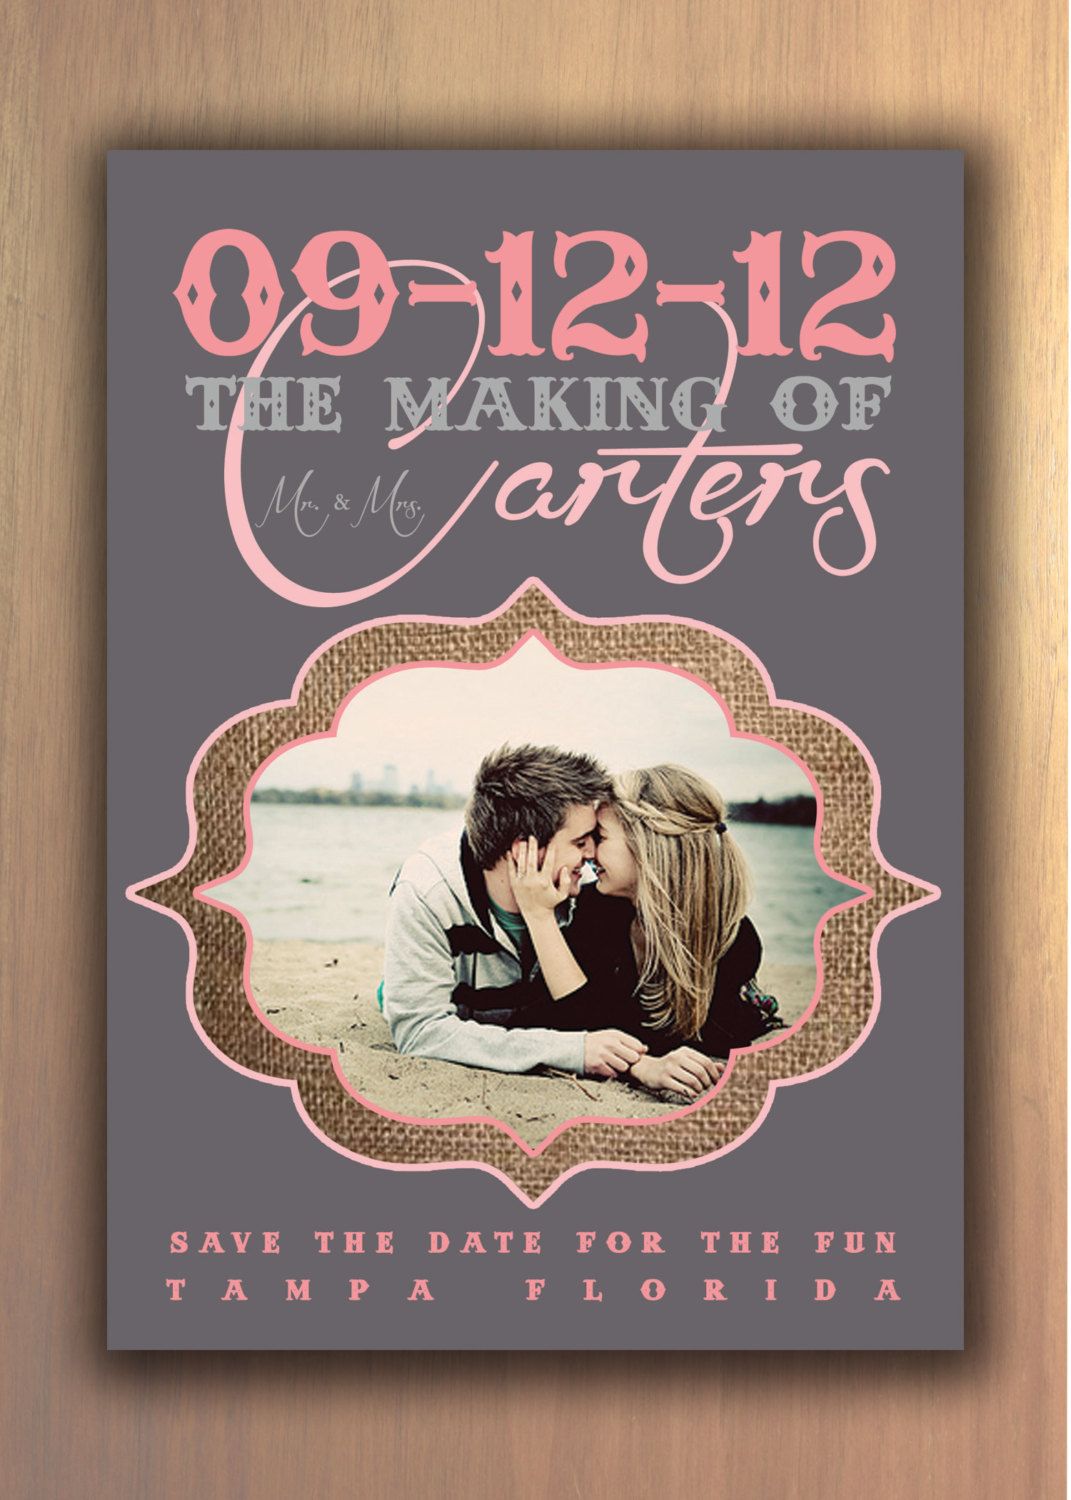 Love these save the dates